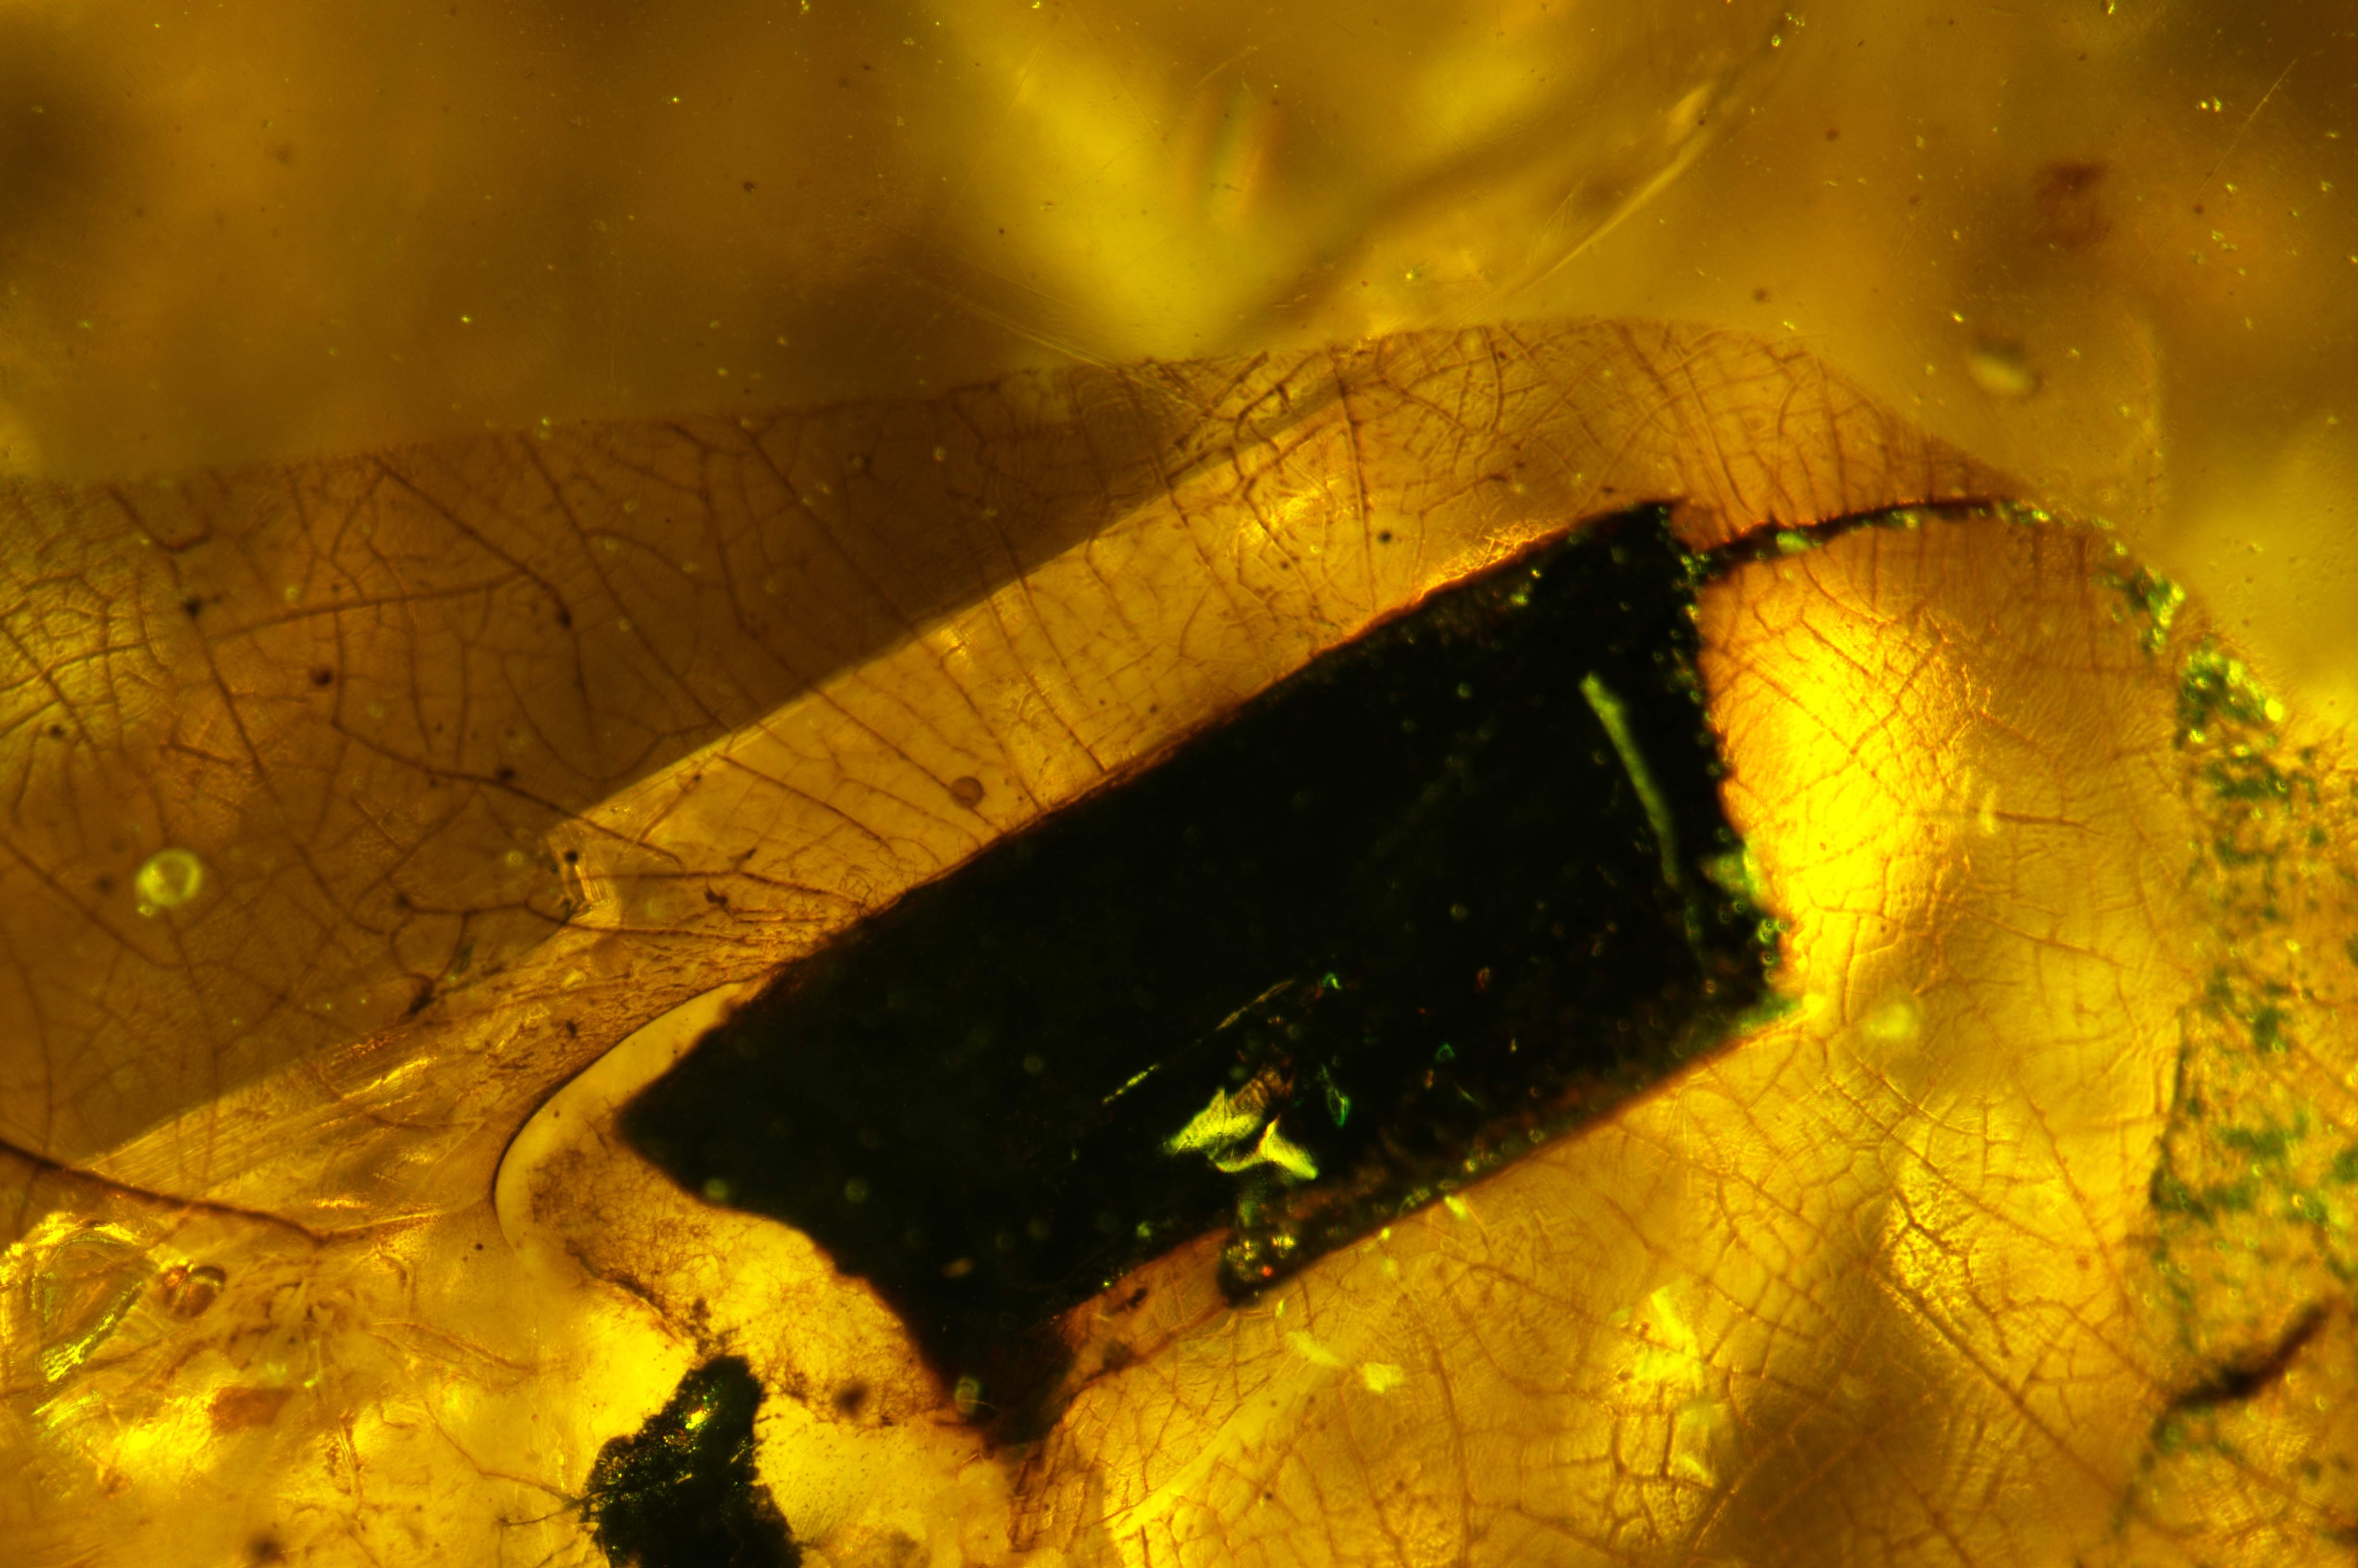 eggs in amber with leaf on amber surface